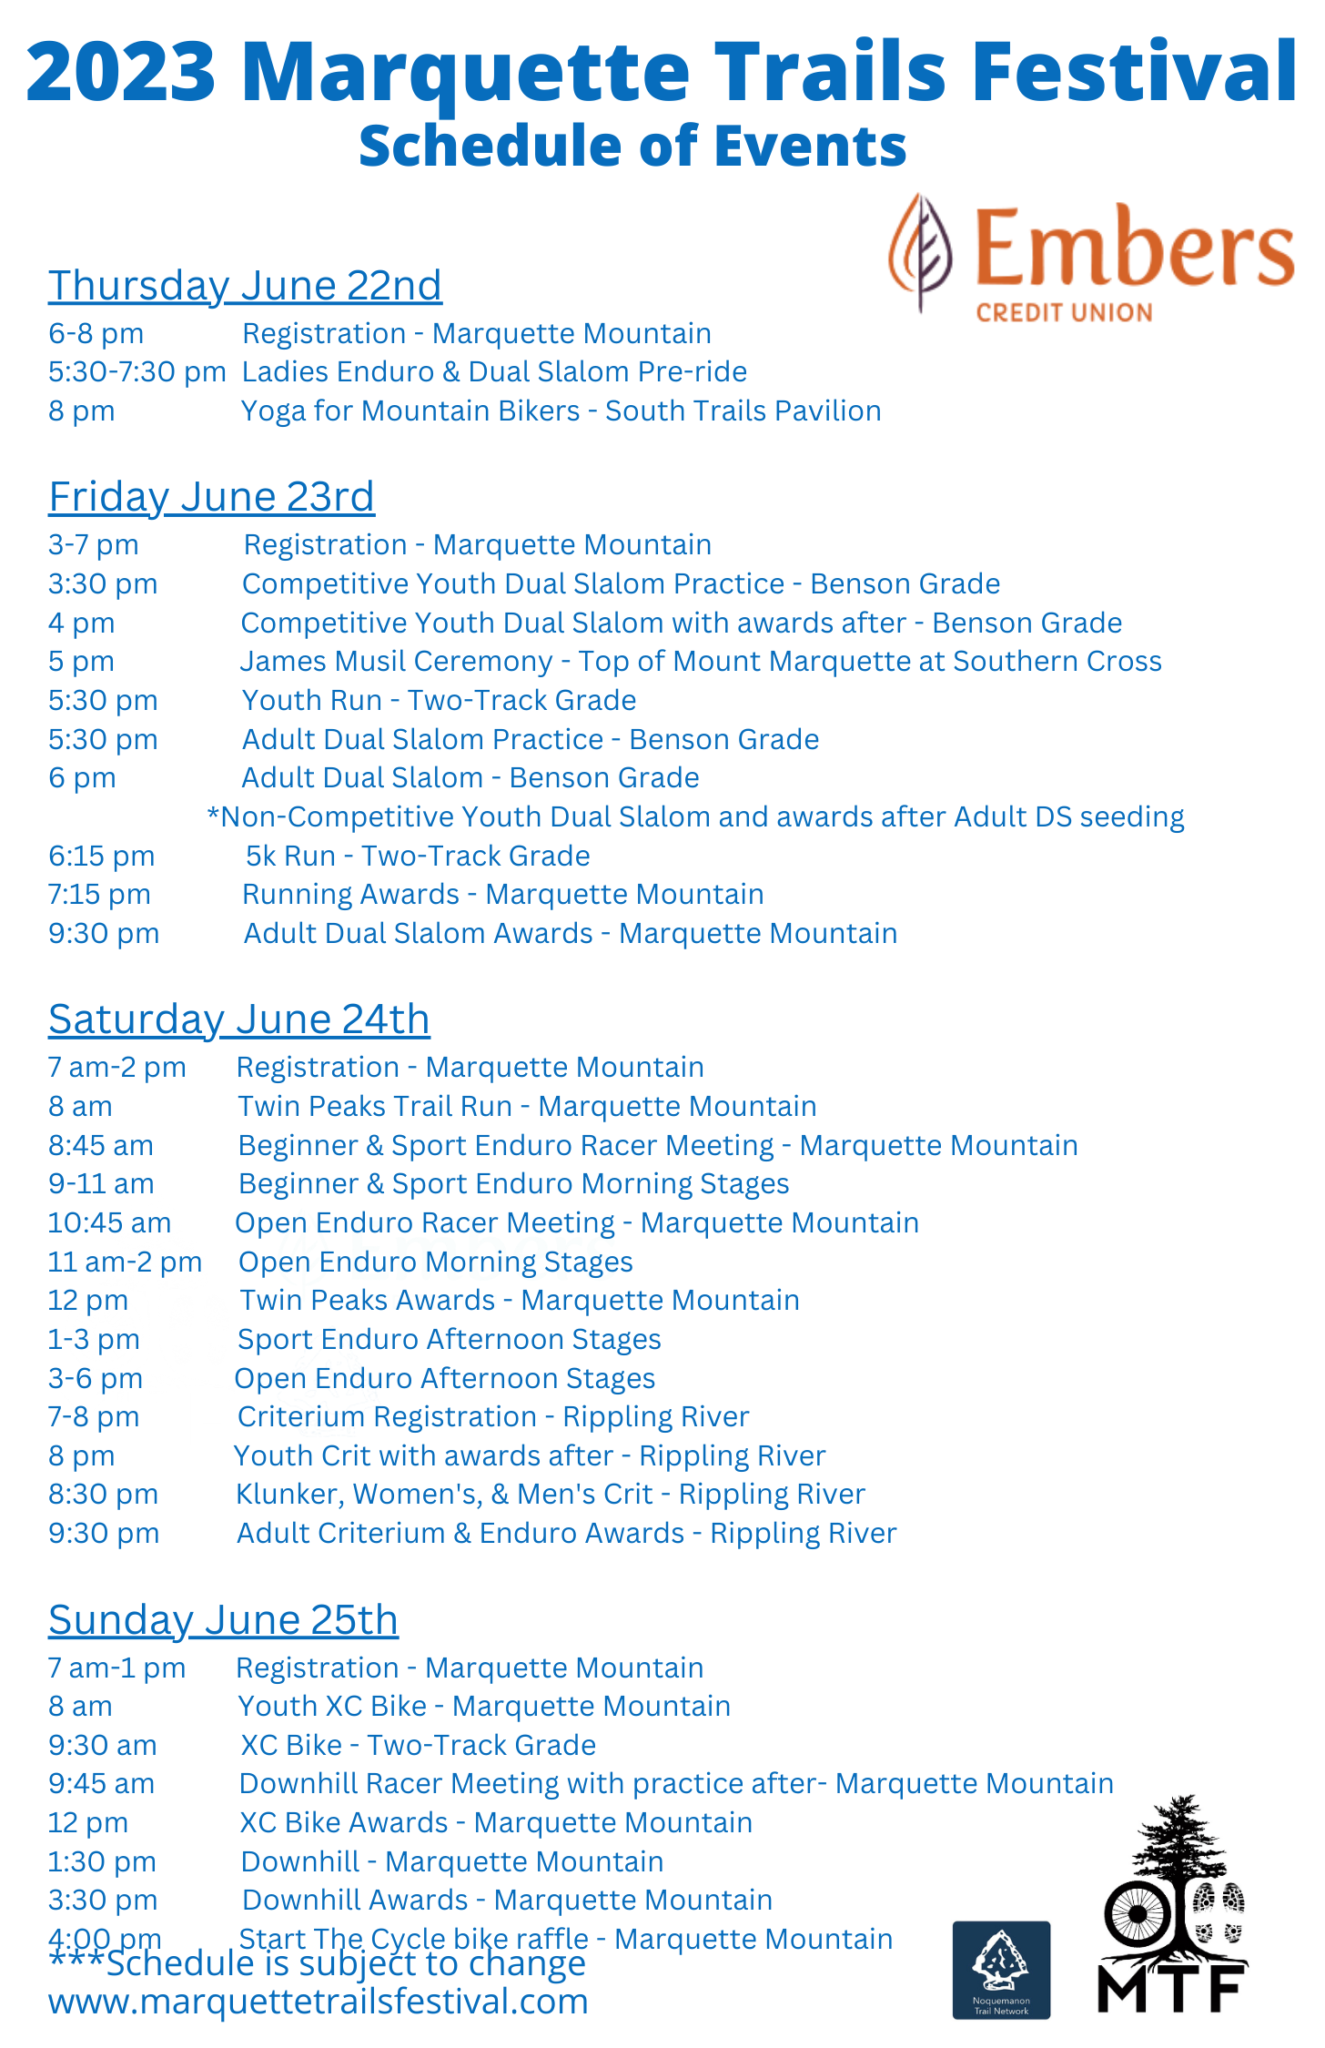 SCHEDULE OF EVENTS MARQUETTE TRAILS FEST